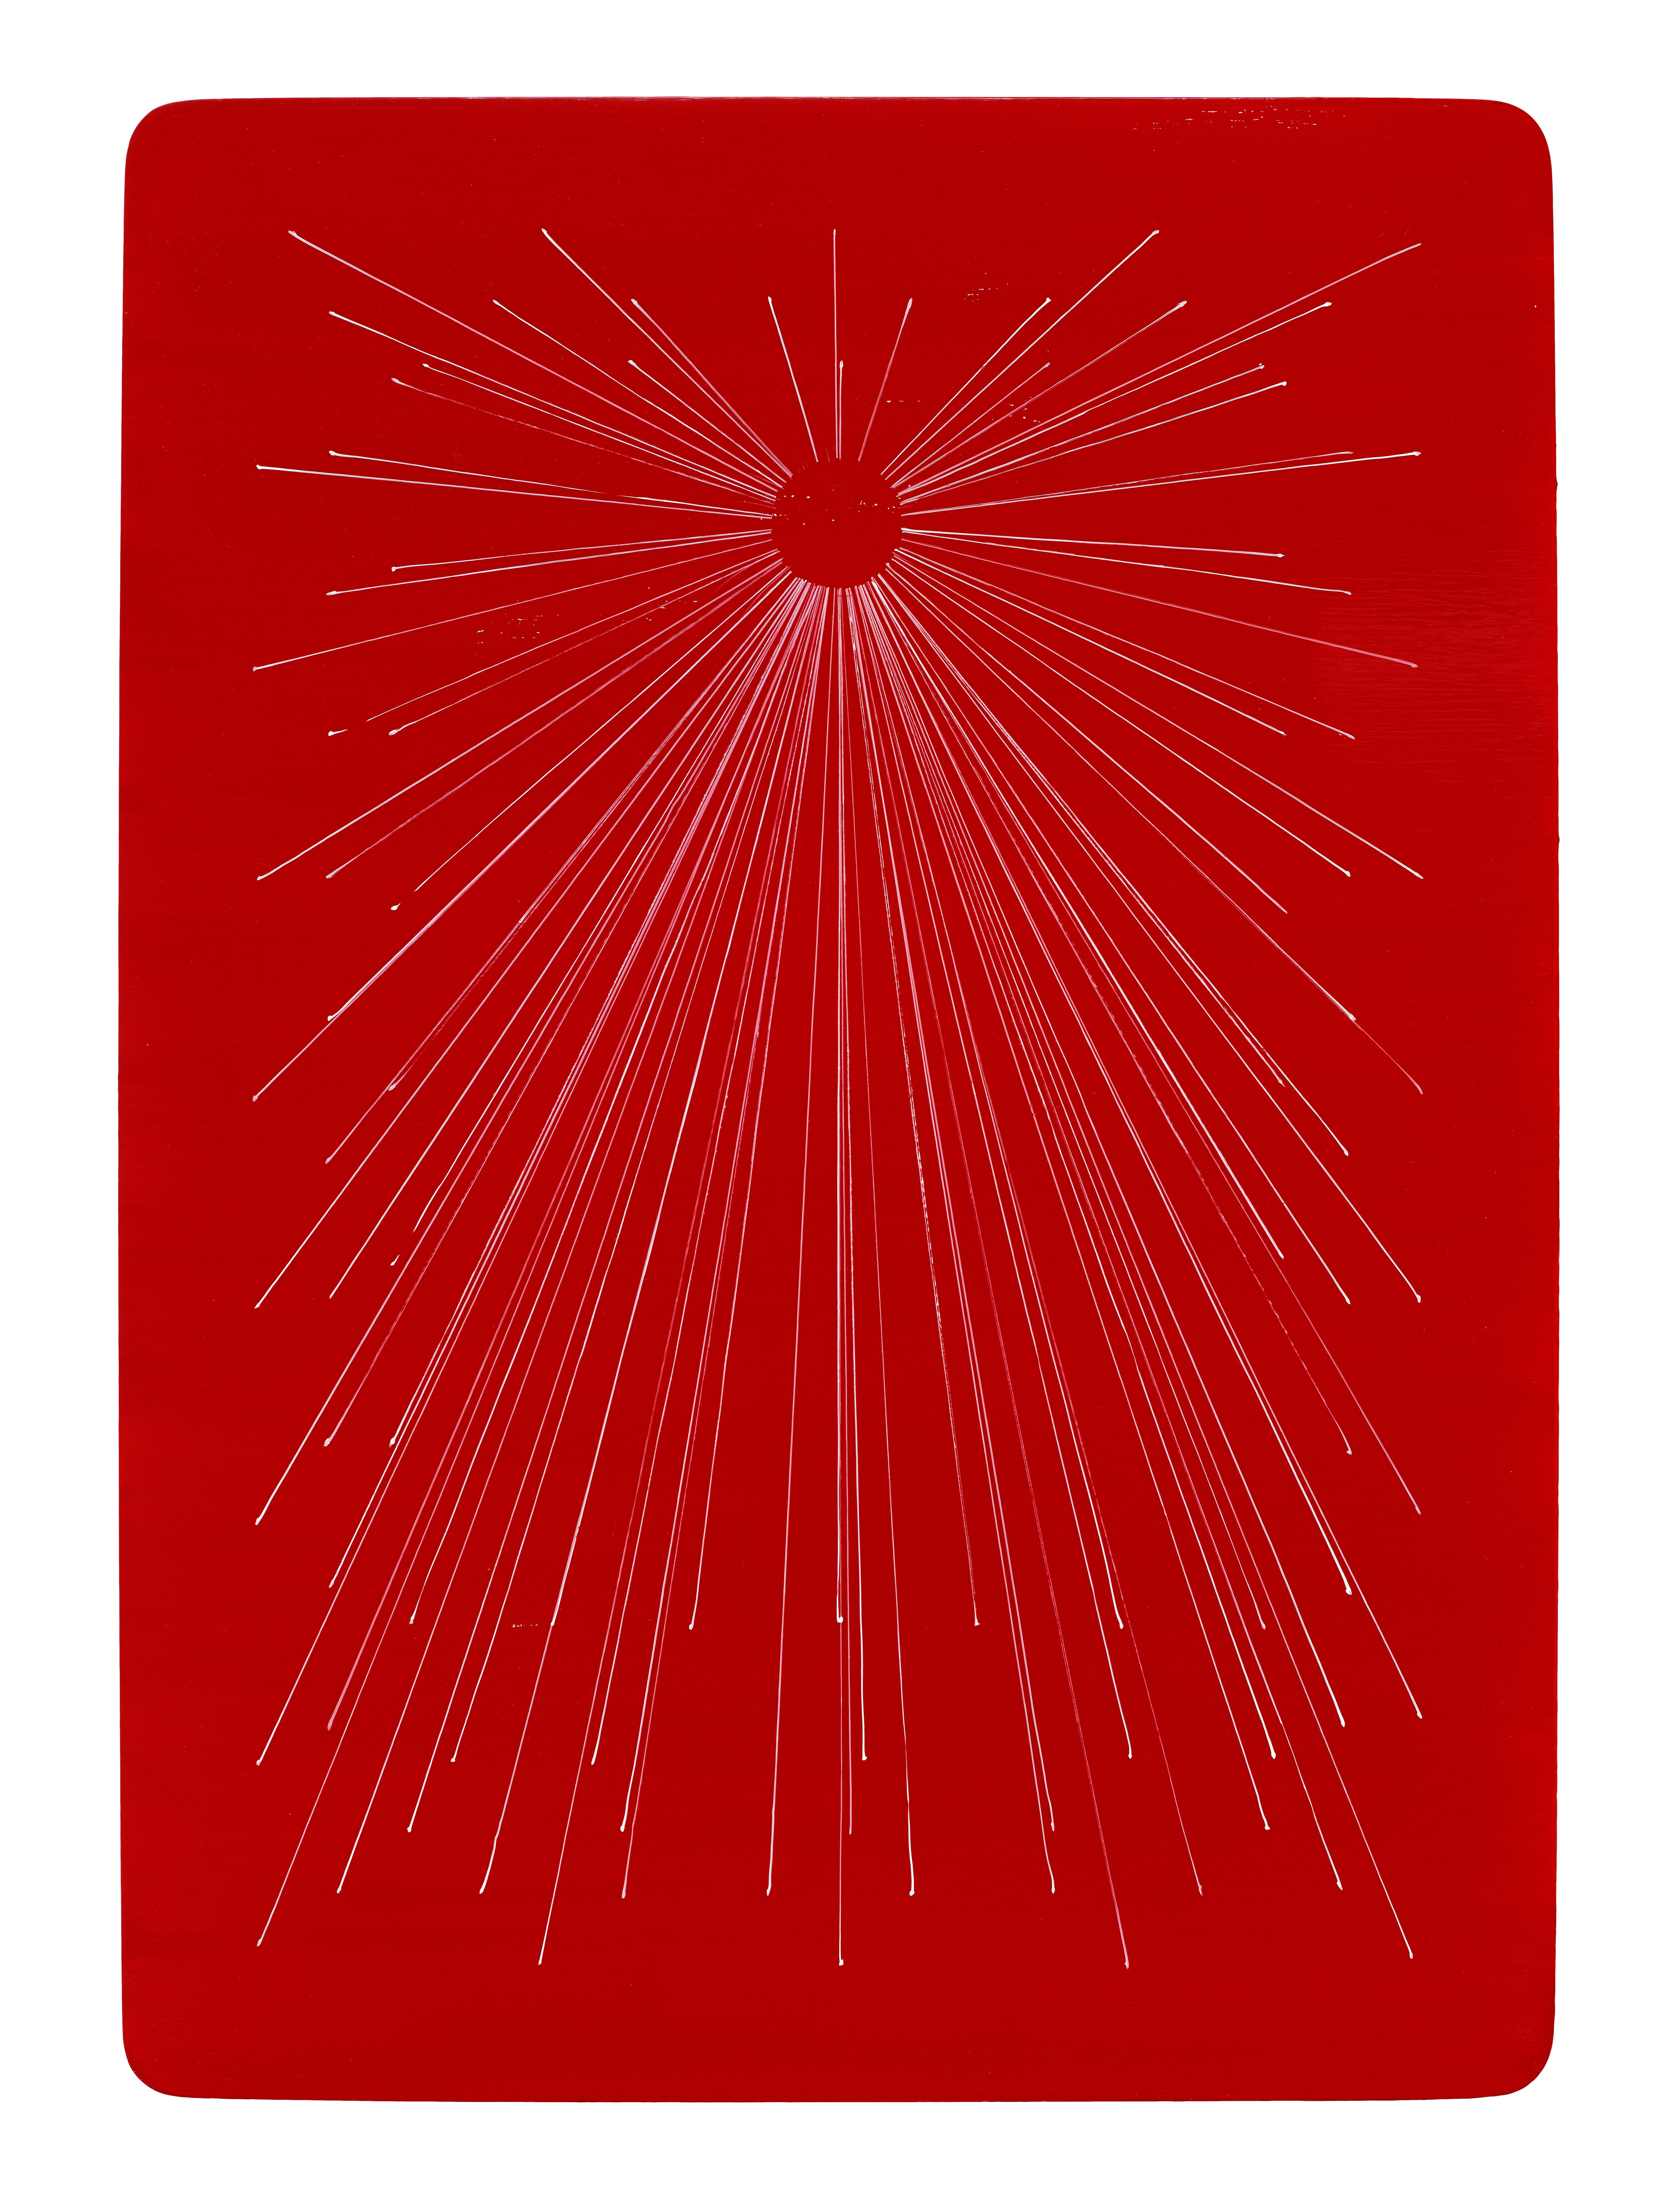 Wednesday Red Card - Painting by Kate Shepherd